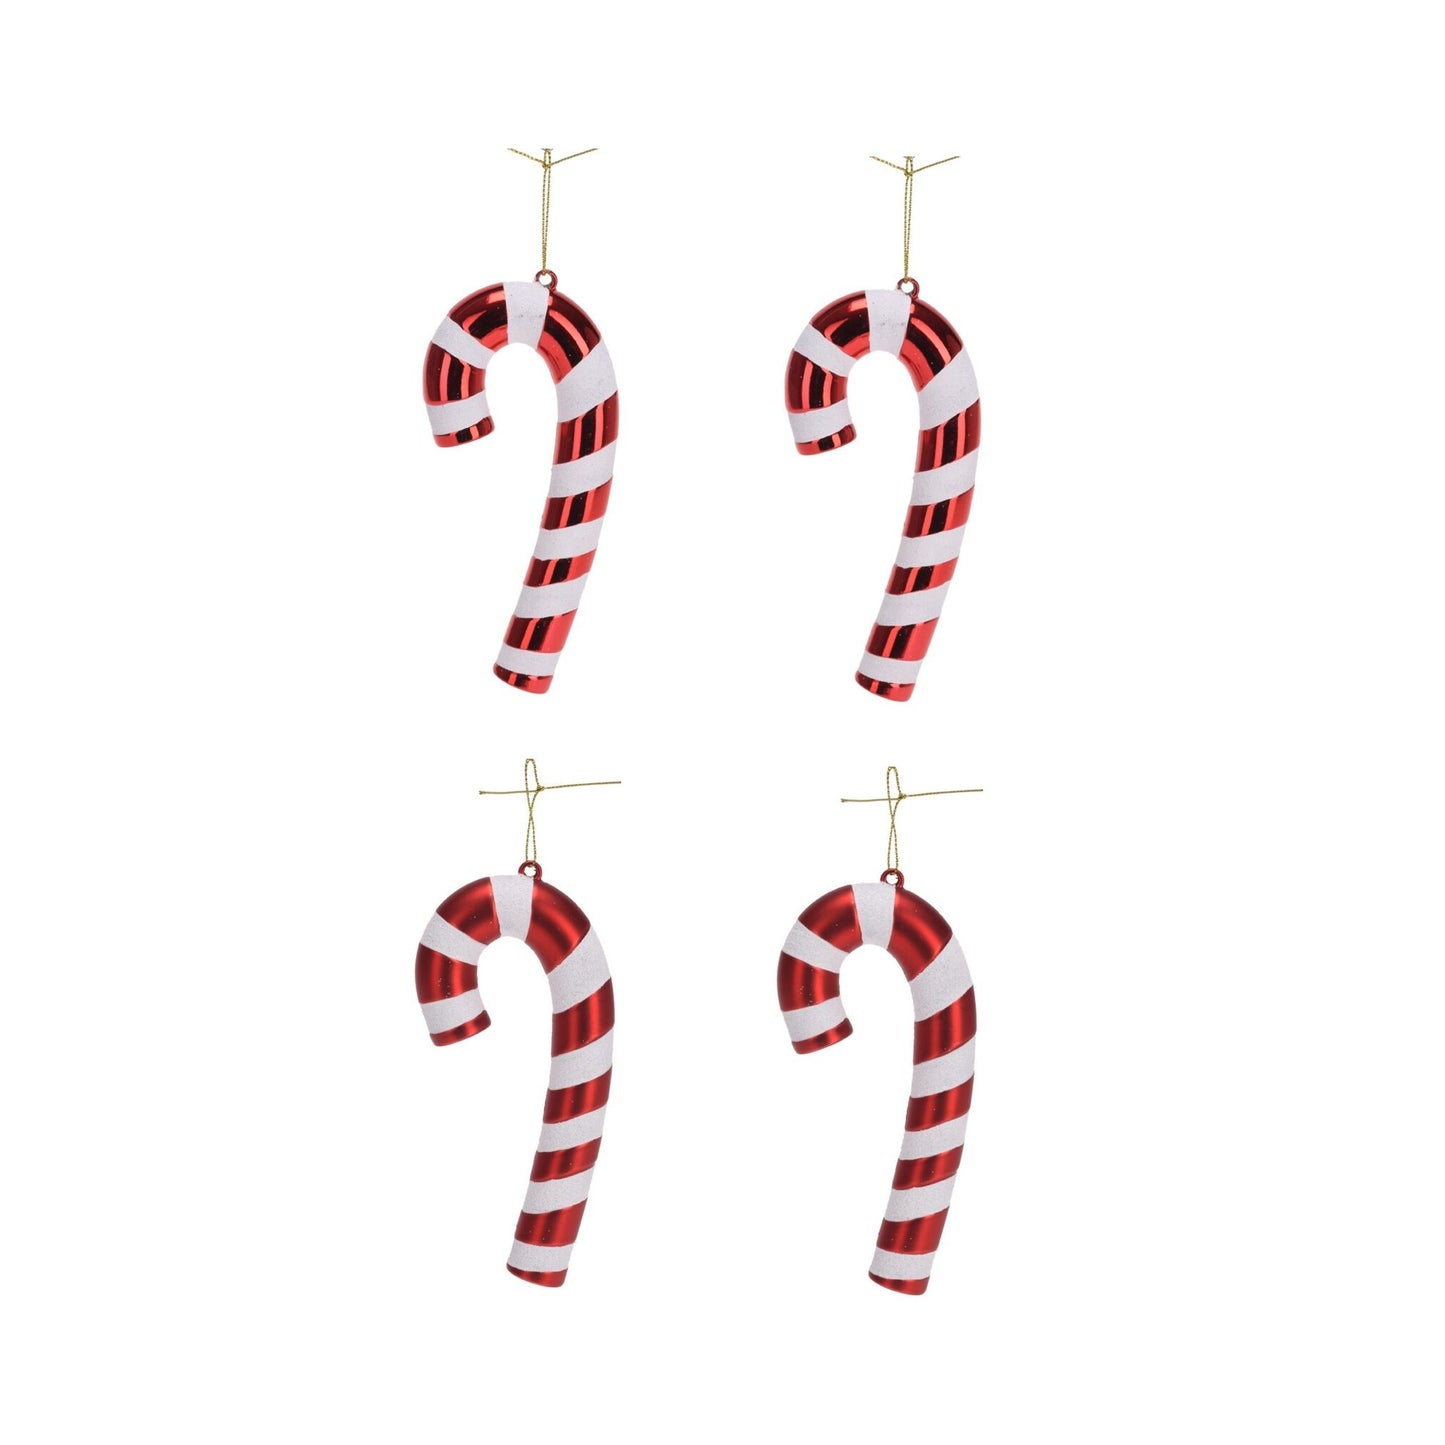 Set of 4 Candy Cane Christmas Tree Decorations